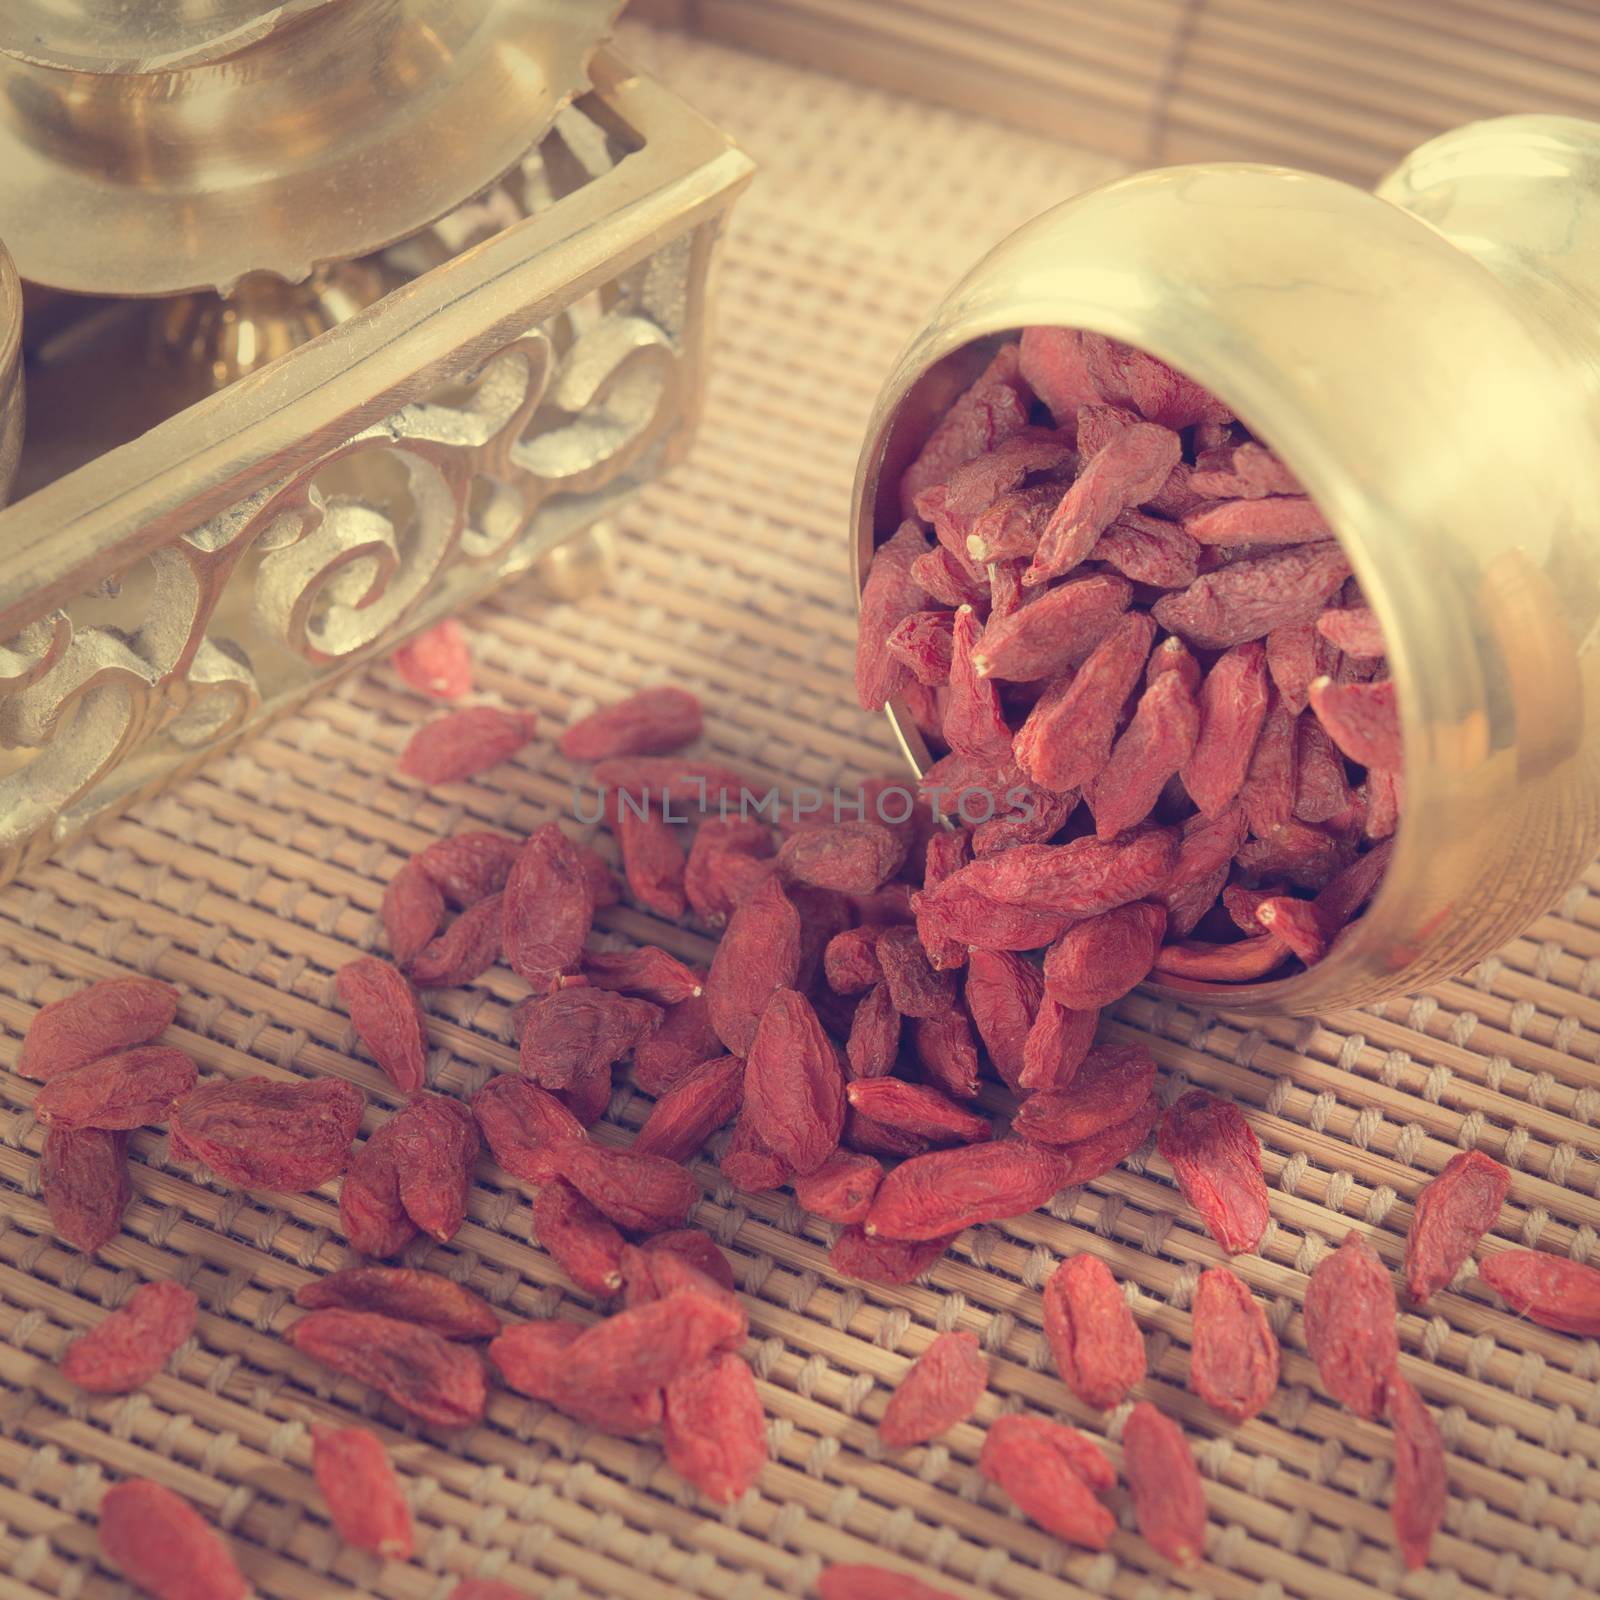 Vintage retra style red dried goji berries, wolfberry or lycium, chinese herbal medicine close-up on bamboo mat. Lycium barbarum.